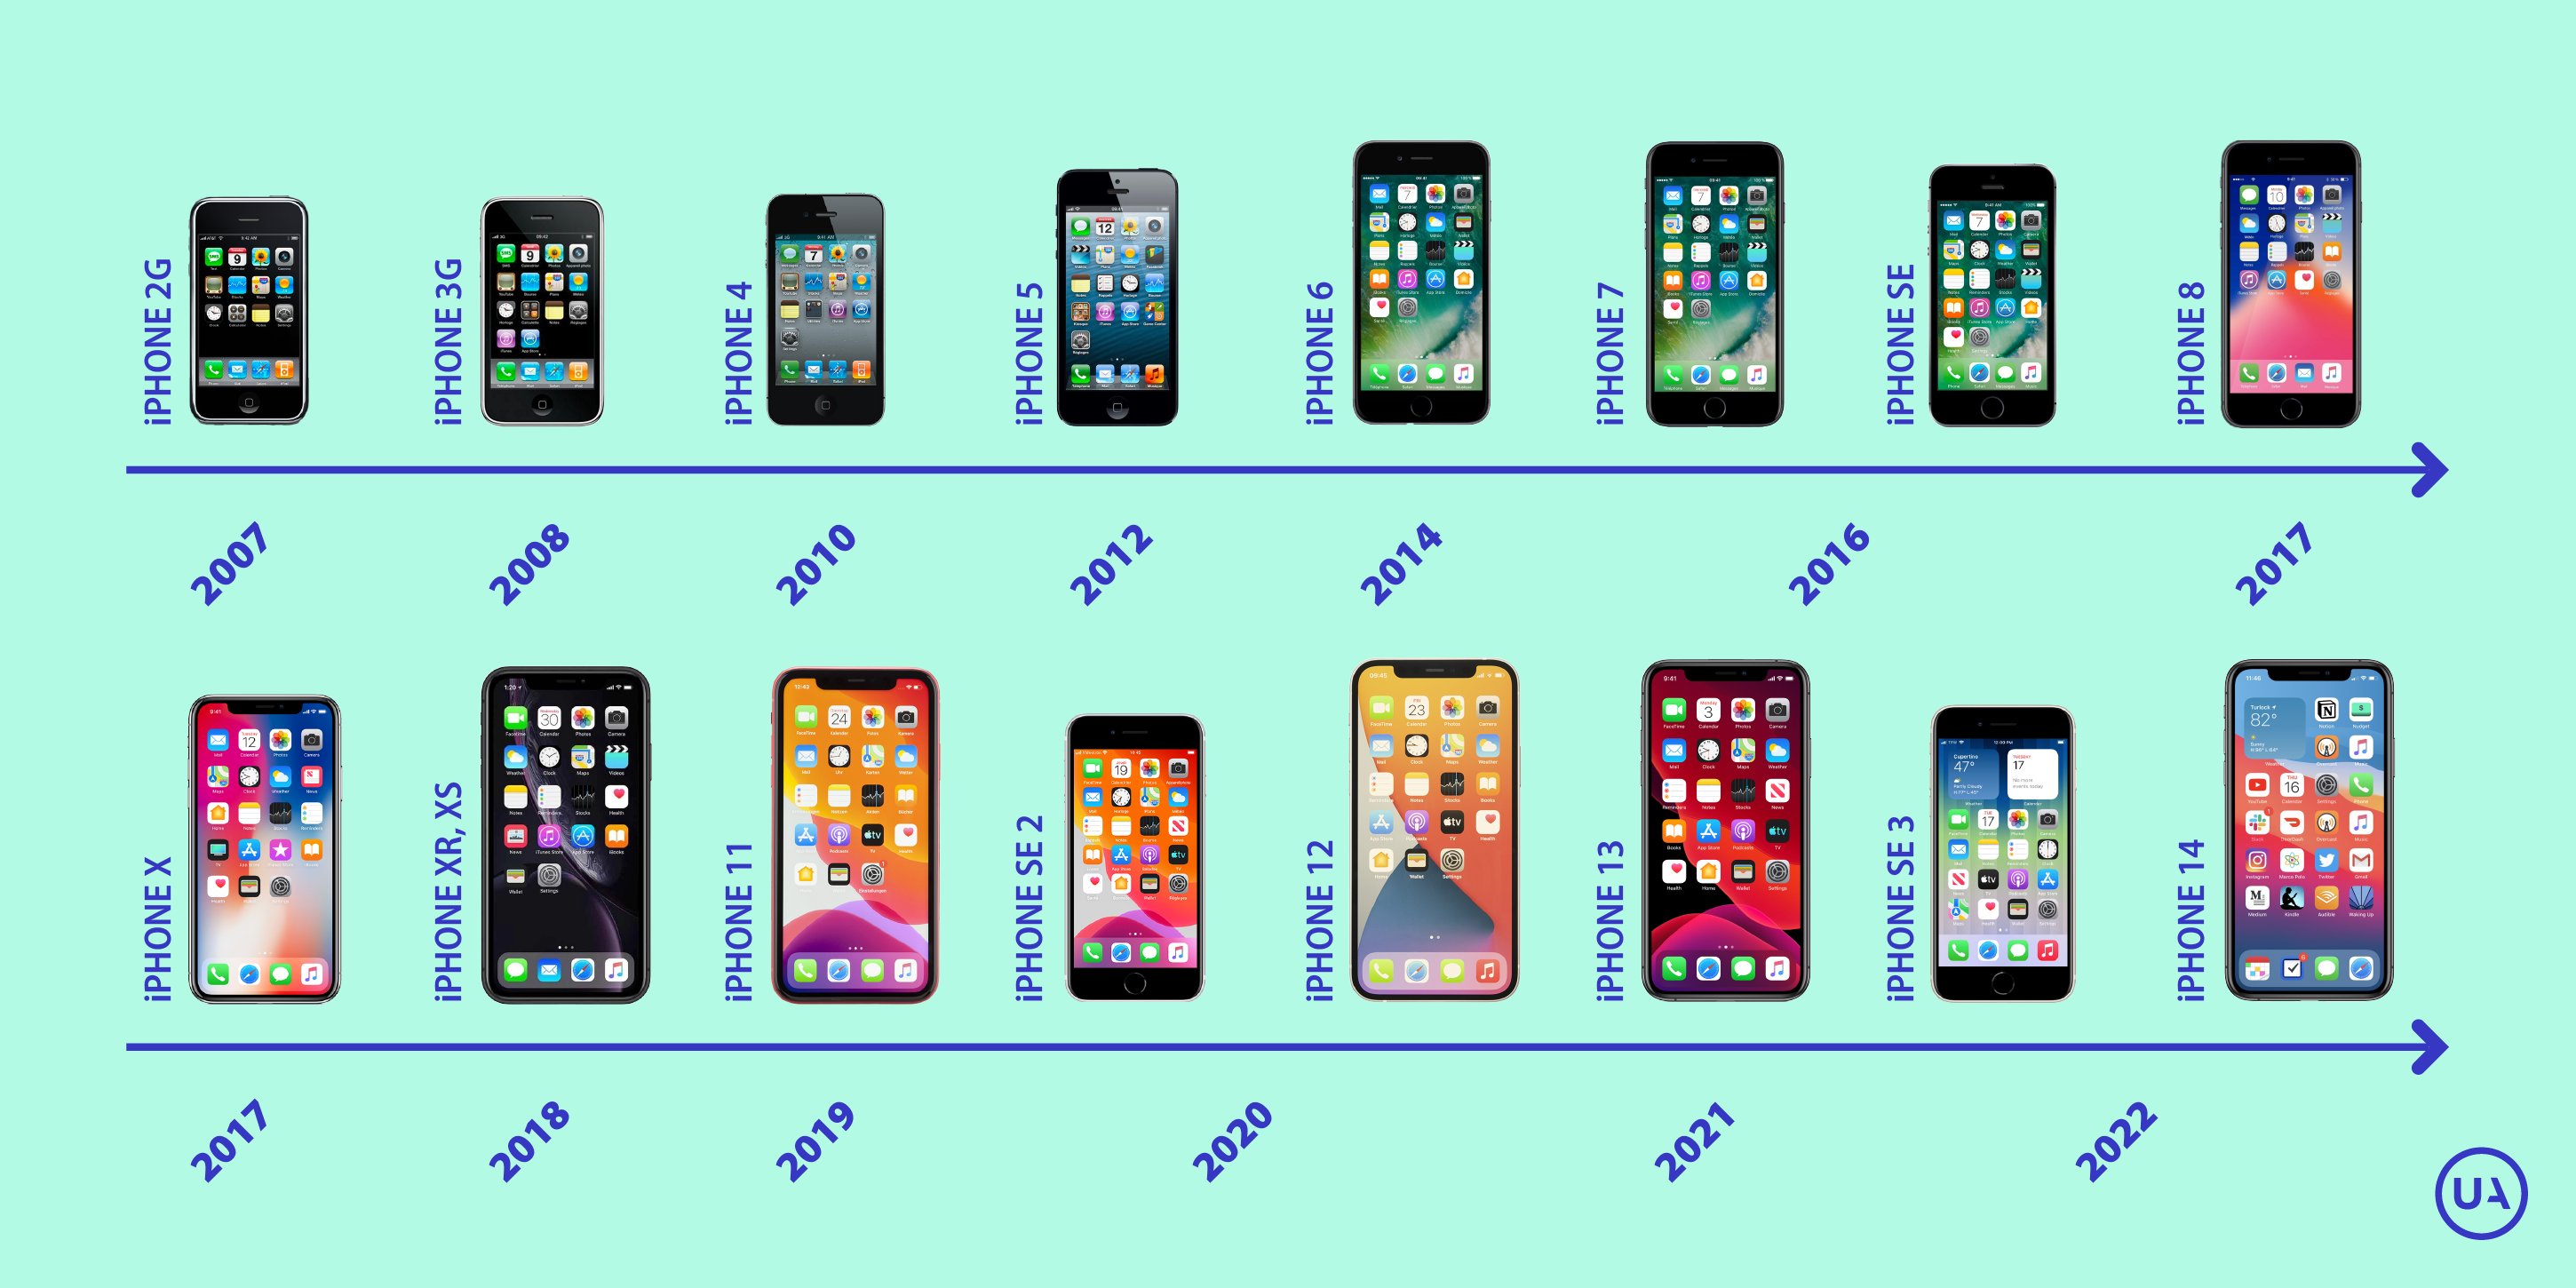 The evolution of the iPhone in 15 years